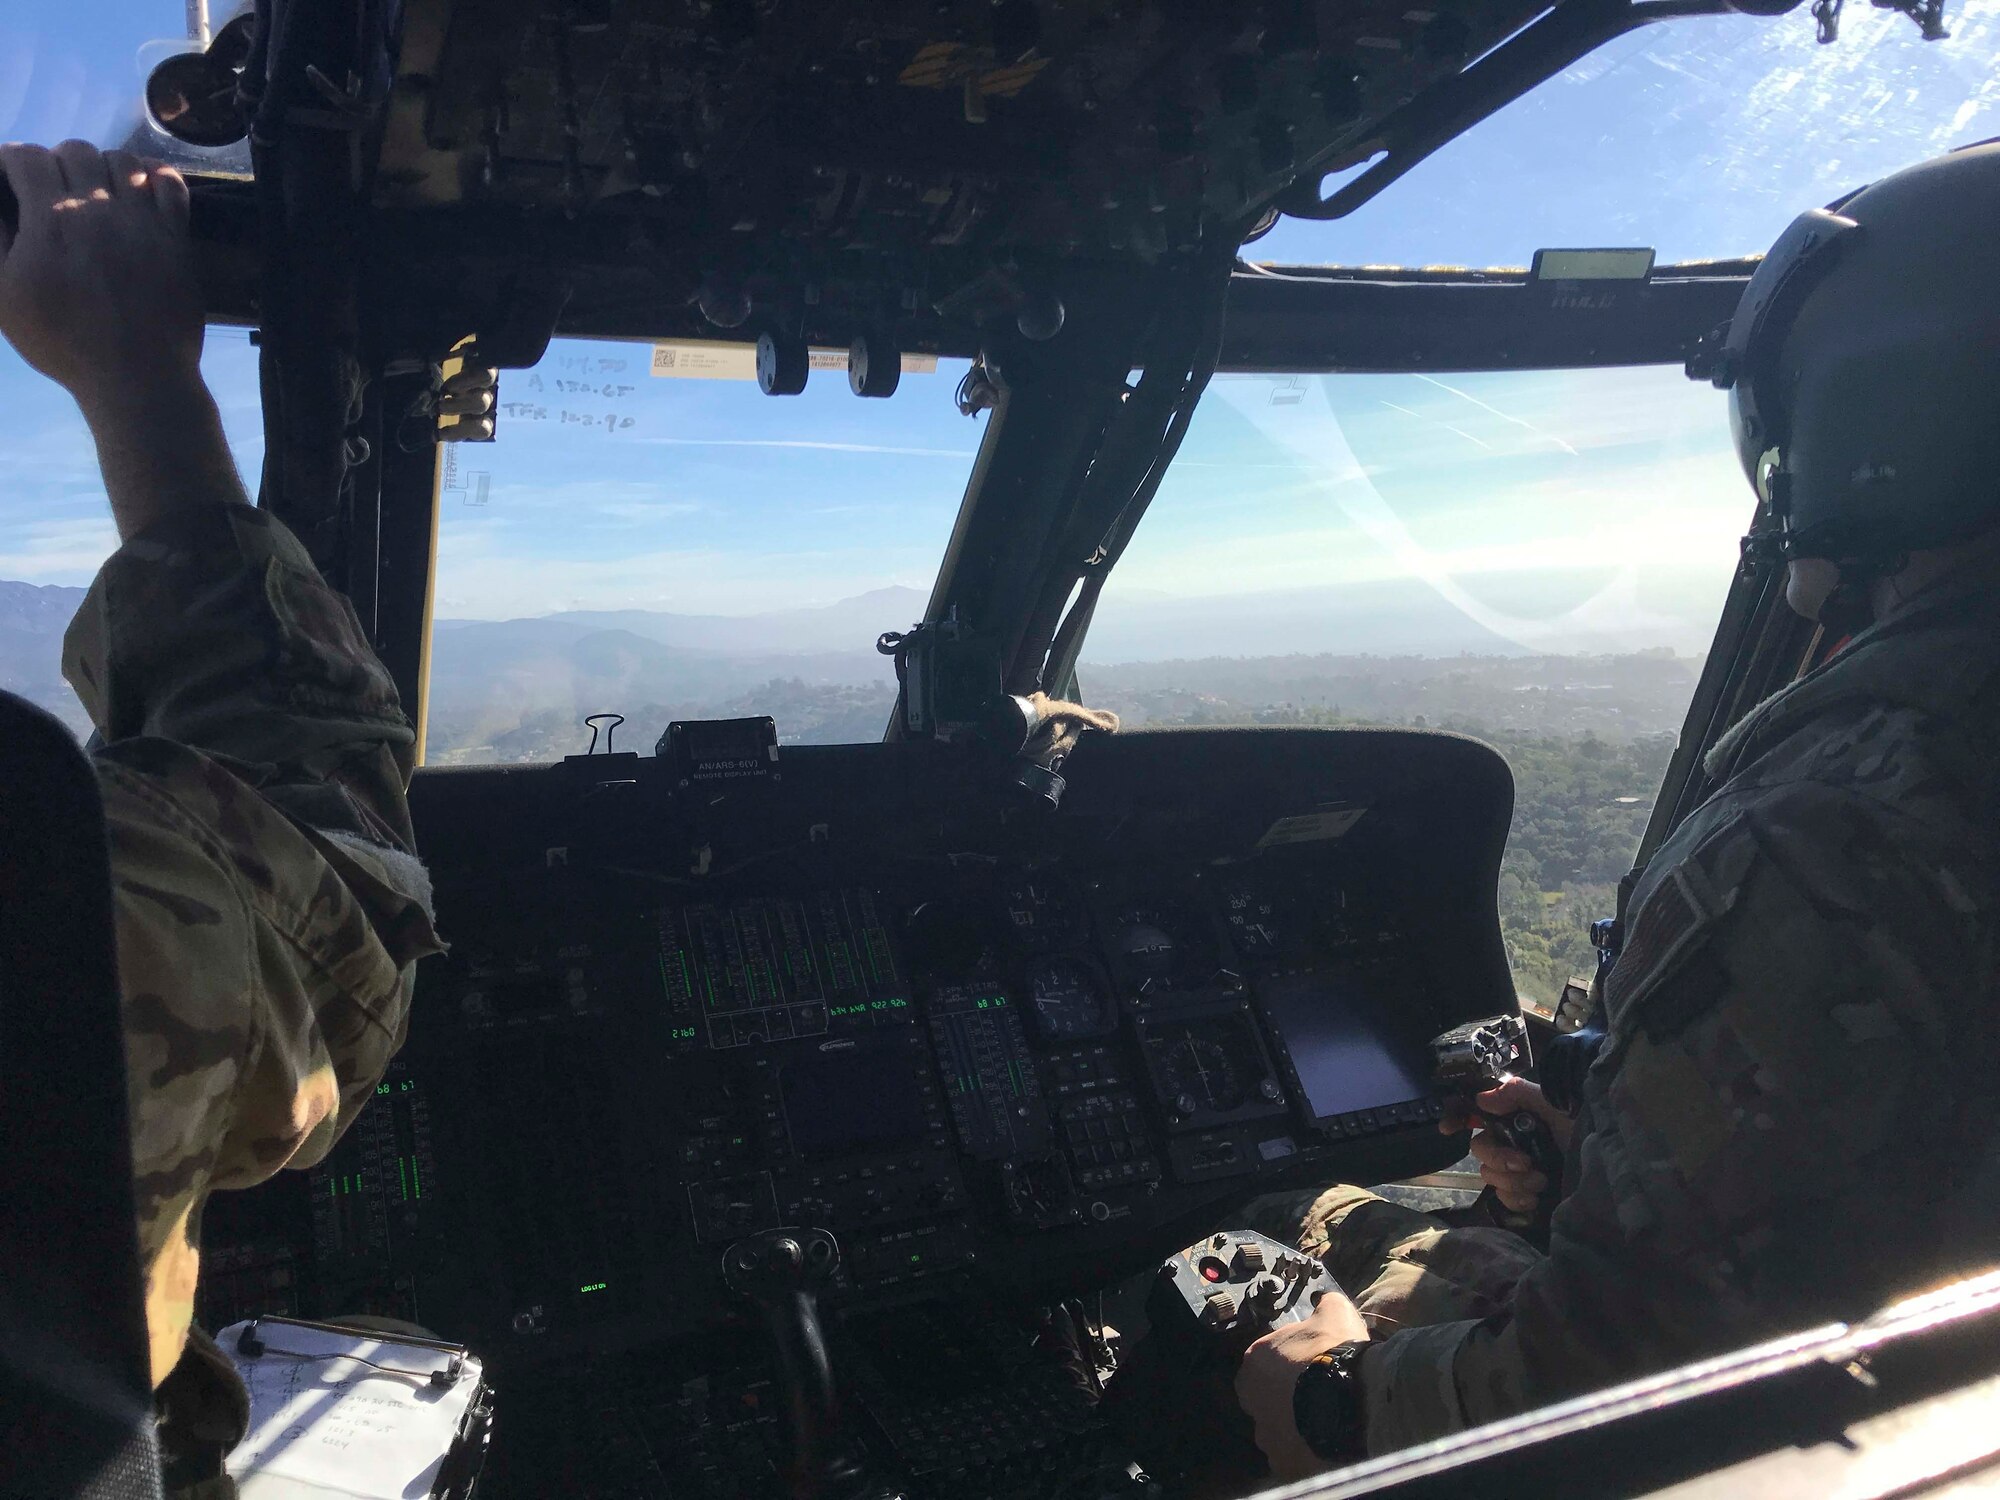 A California Air National Guard HH-60G Pave Hawk rescue helicopter with air crews and  two elite Guardian Angel pararescuemen from the 129th Rescue Wing Moffett Air National Guard Base, Calif, provide search and rescue operations in Southern California, impacted by a mud slides, Jan. 10, 2018. (Courtesy photo by Staff Sgt. Cristian Meyers/released)